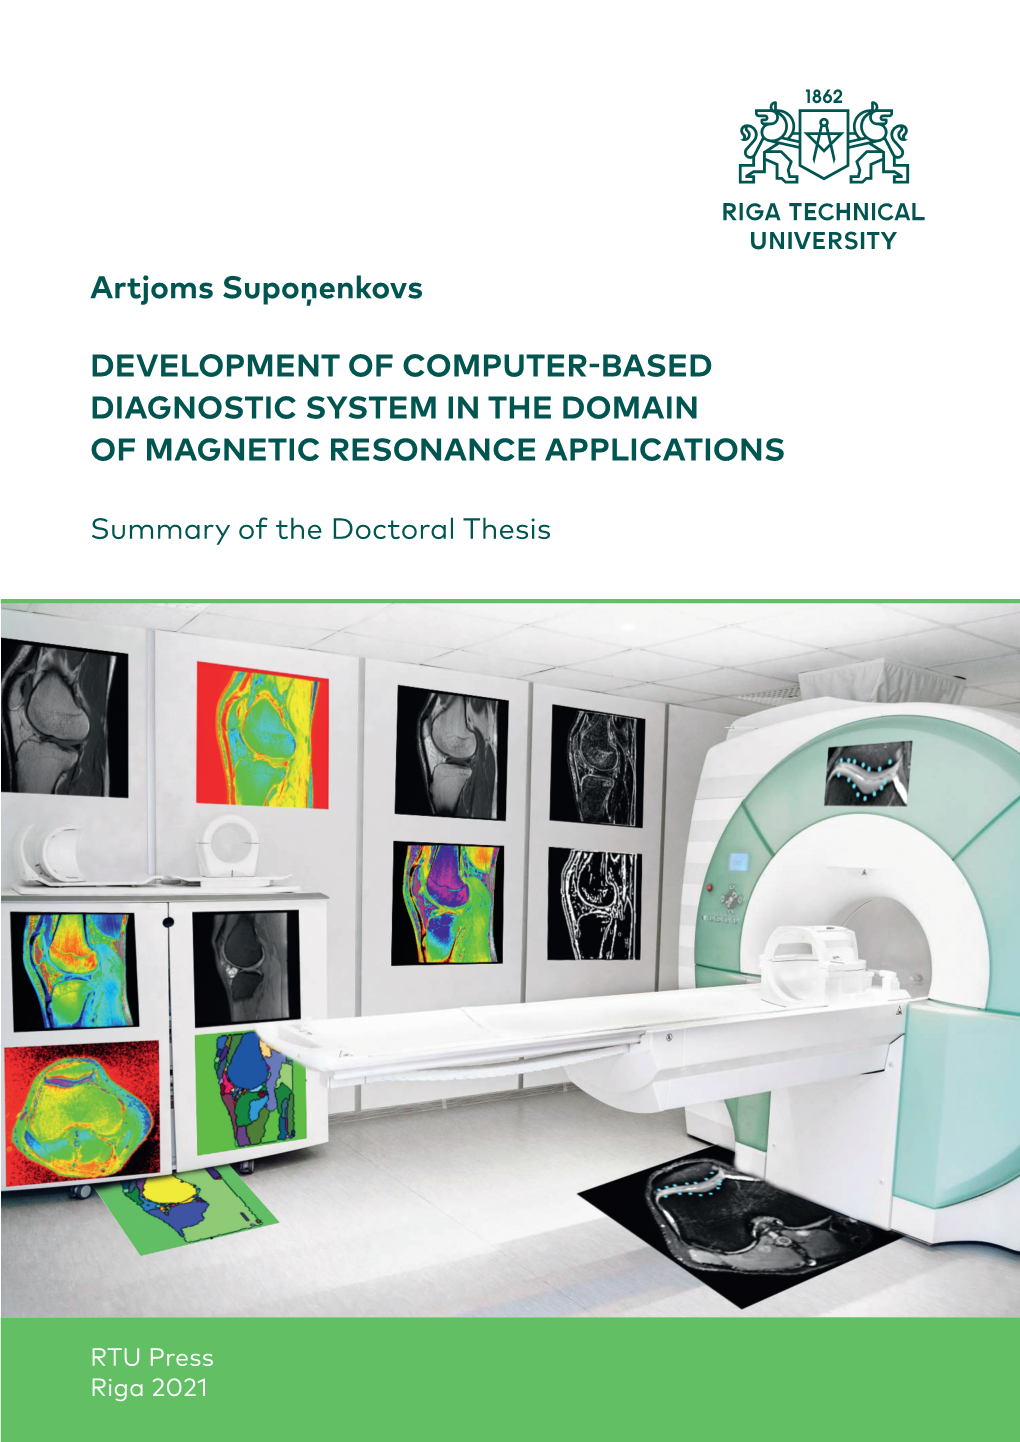 Development of Computer-Based Diagnostic System in the Domain of Magnetic Resonance Applications